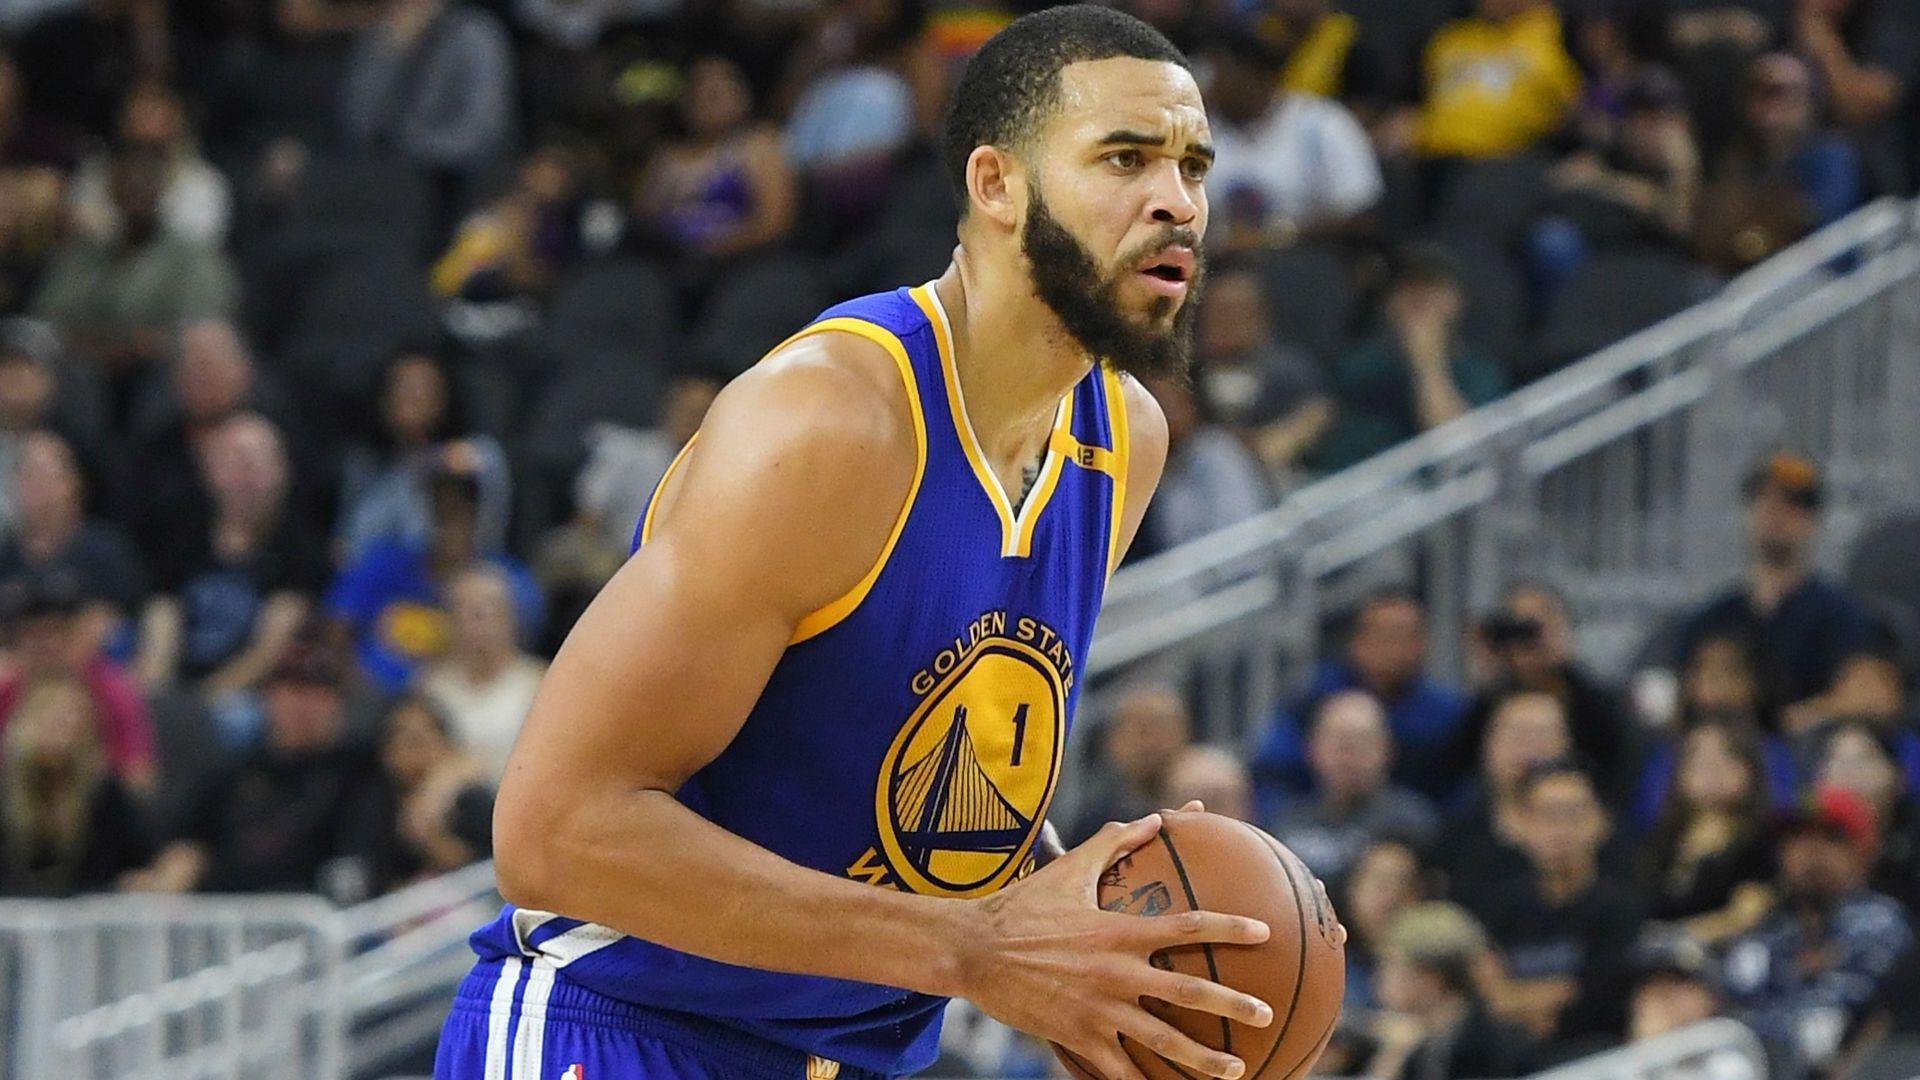 Shaq and Warriors' JaVale McGee get in profane Twitter beef. NBA